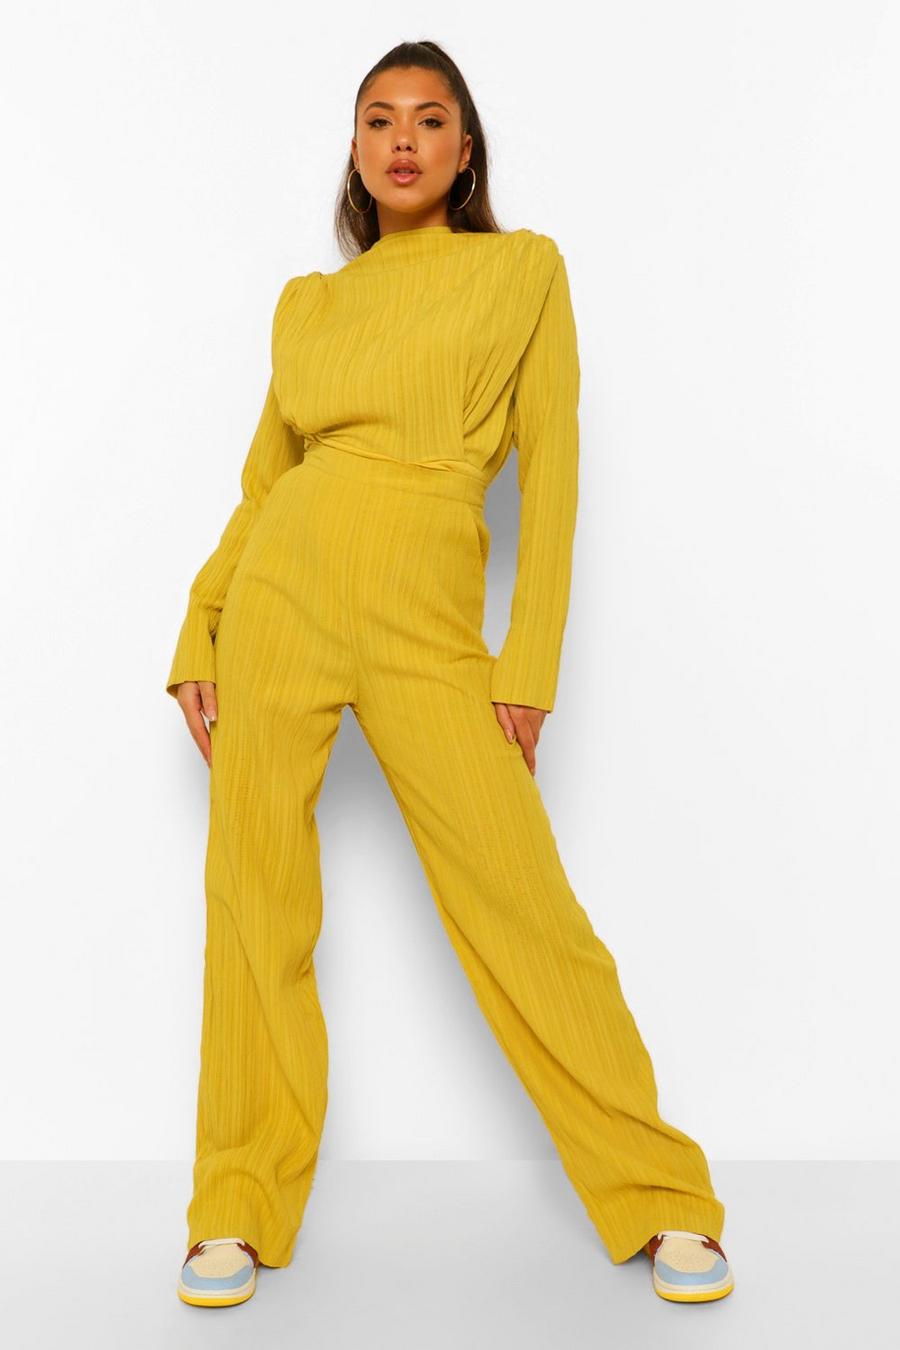 Chartreuse yellow Textured High Waisted Wide Leg Pants